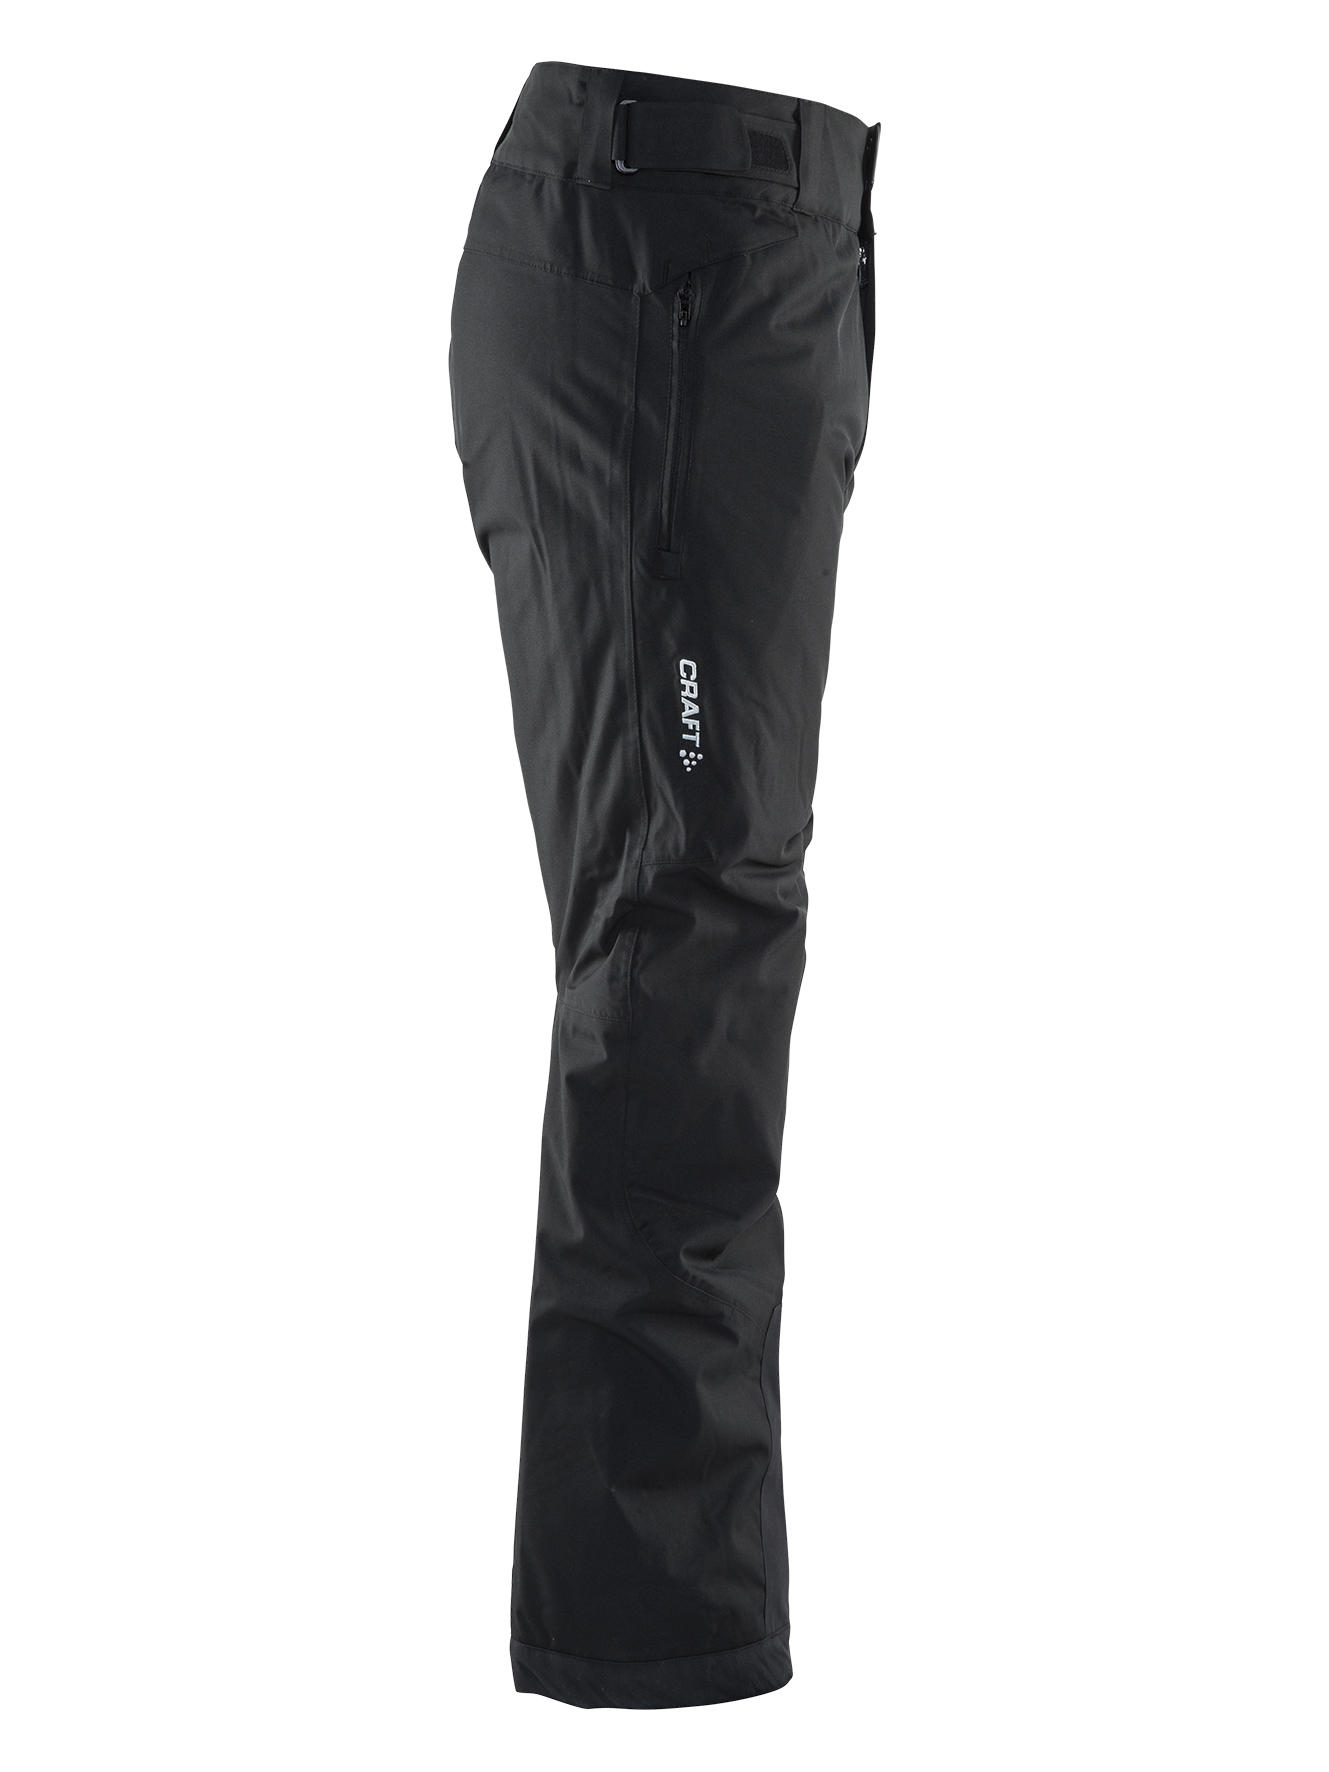 https://craft-products-production.imgix.net/images/2114_4952689caa-1902290_9999_eira_padded_pant_r-original.jpg